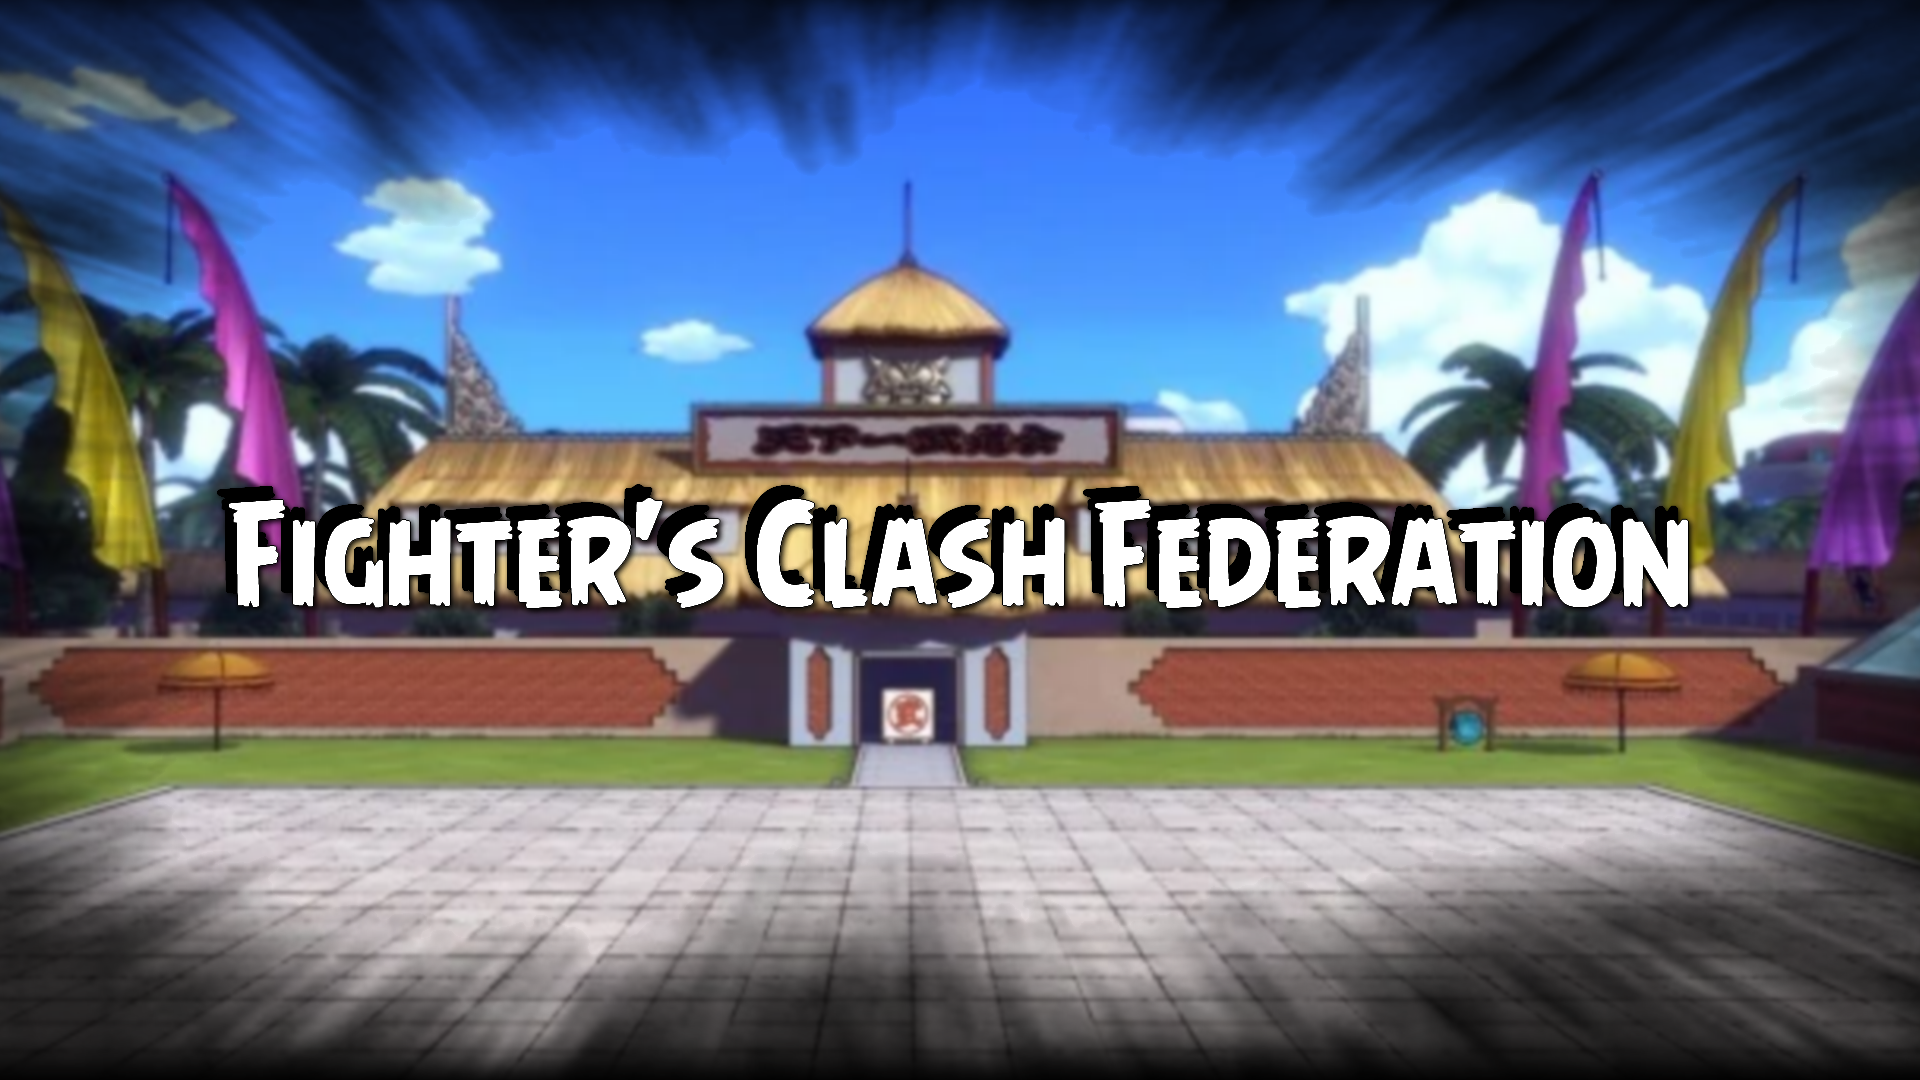 Fighter's Clash Federation